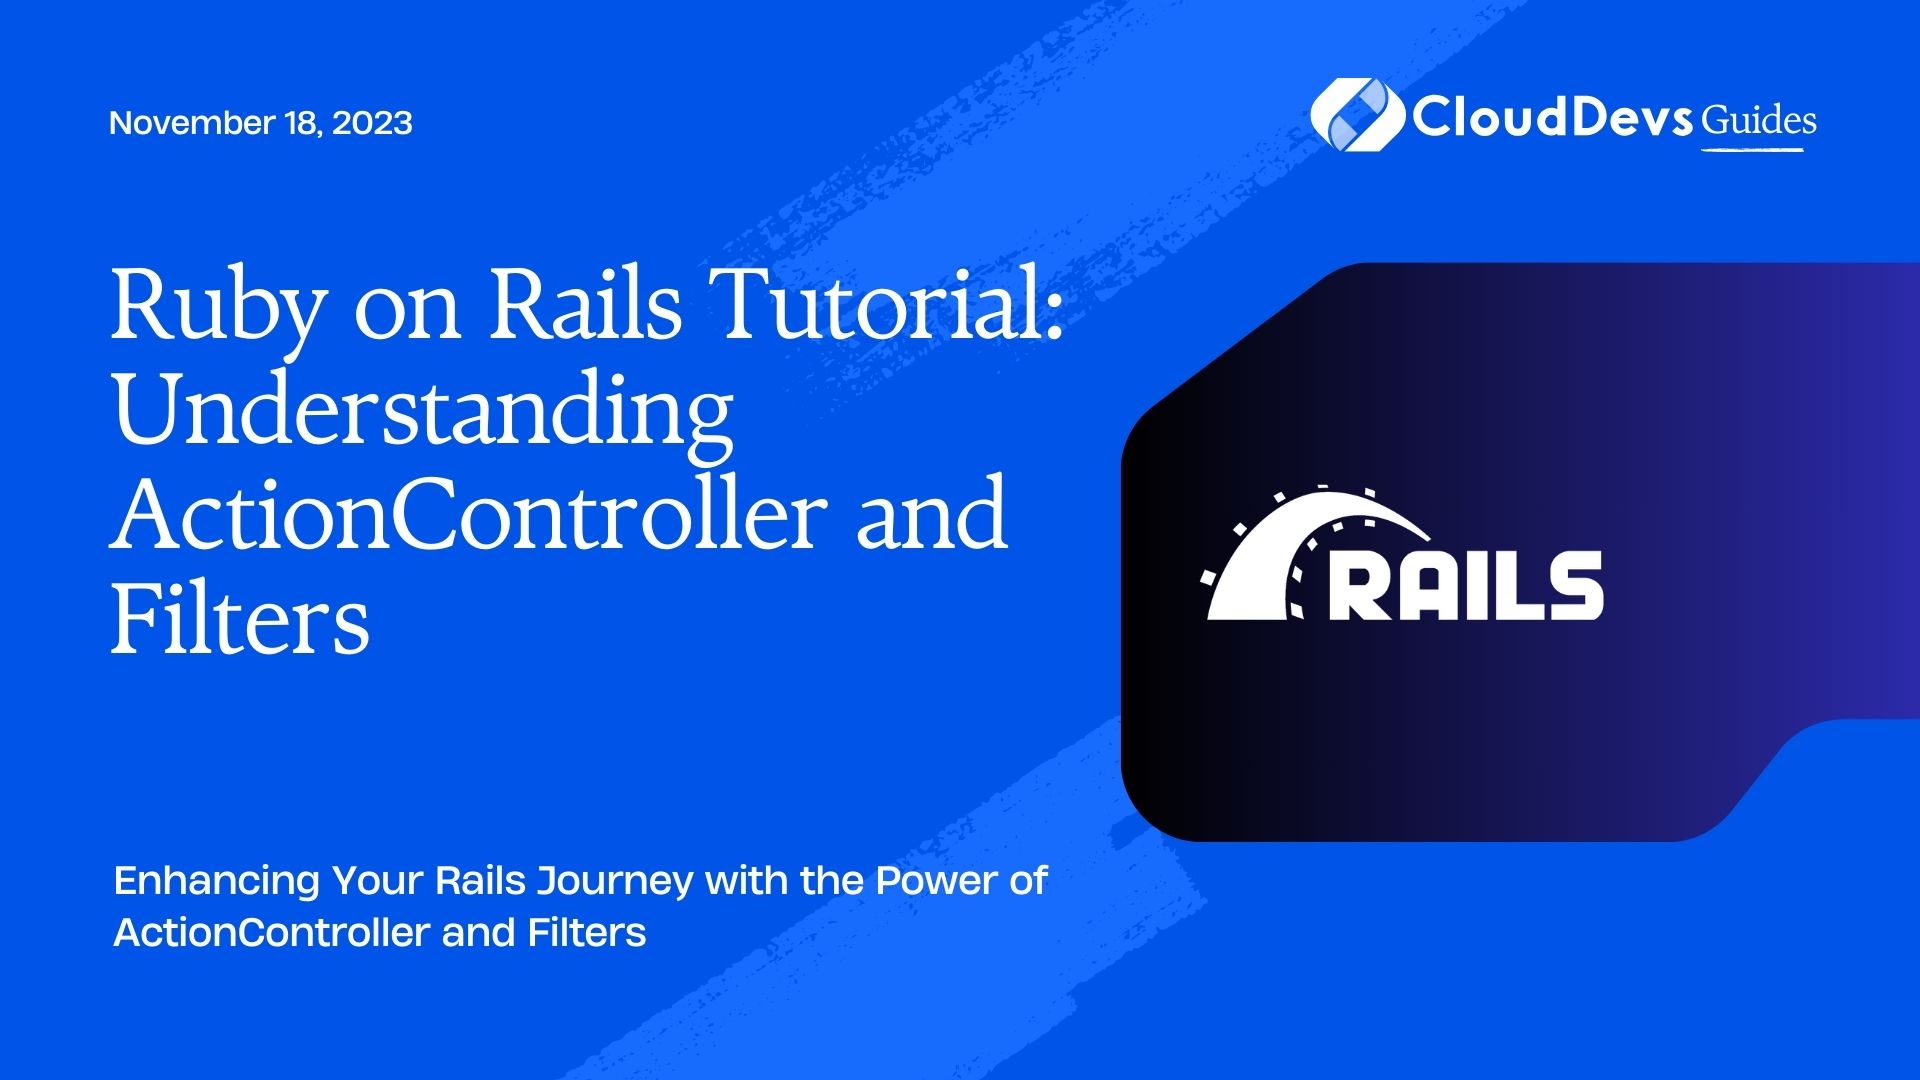 Ruby on Rails Tutorial: Understanding ActionController and Filters